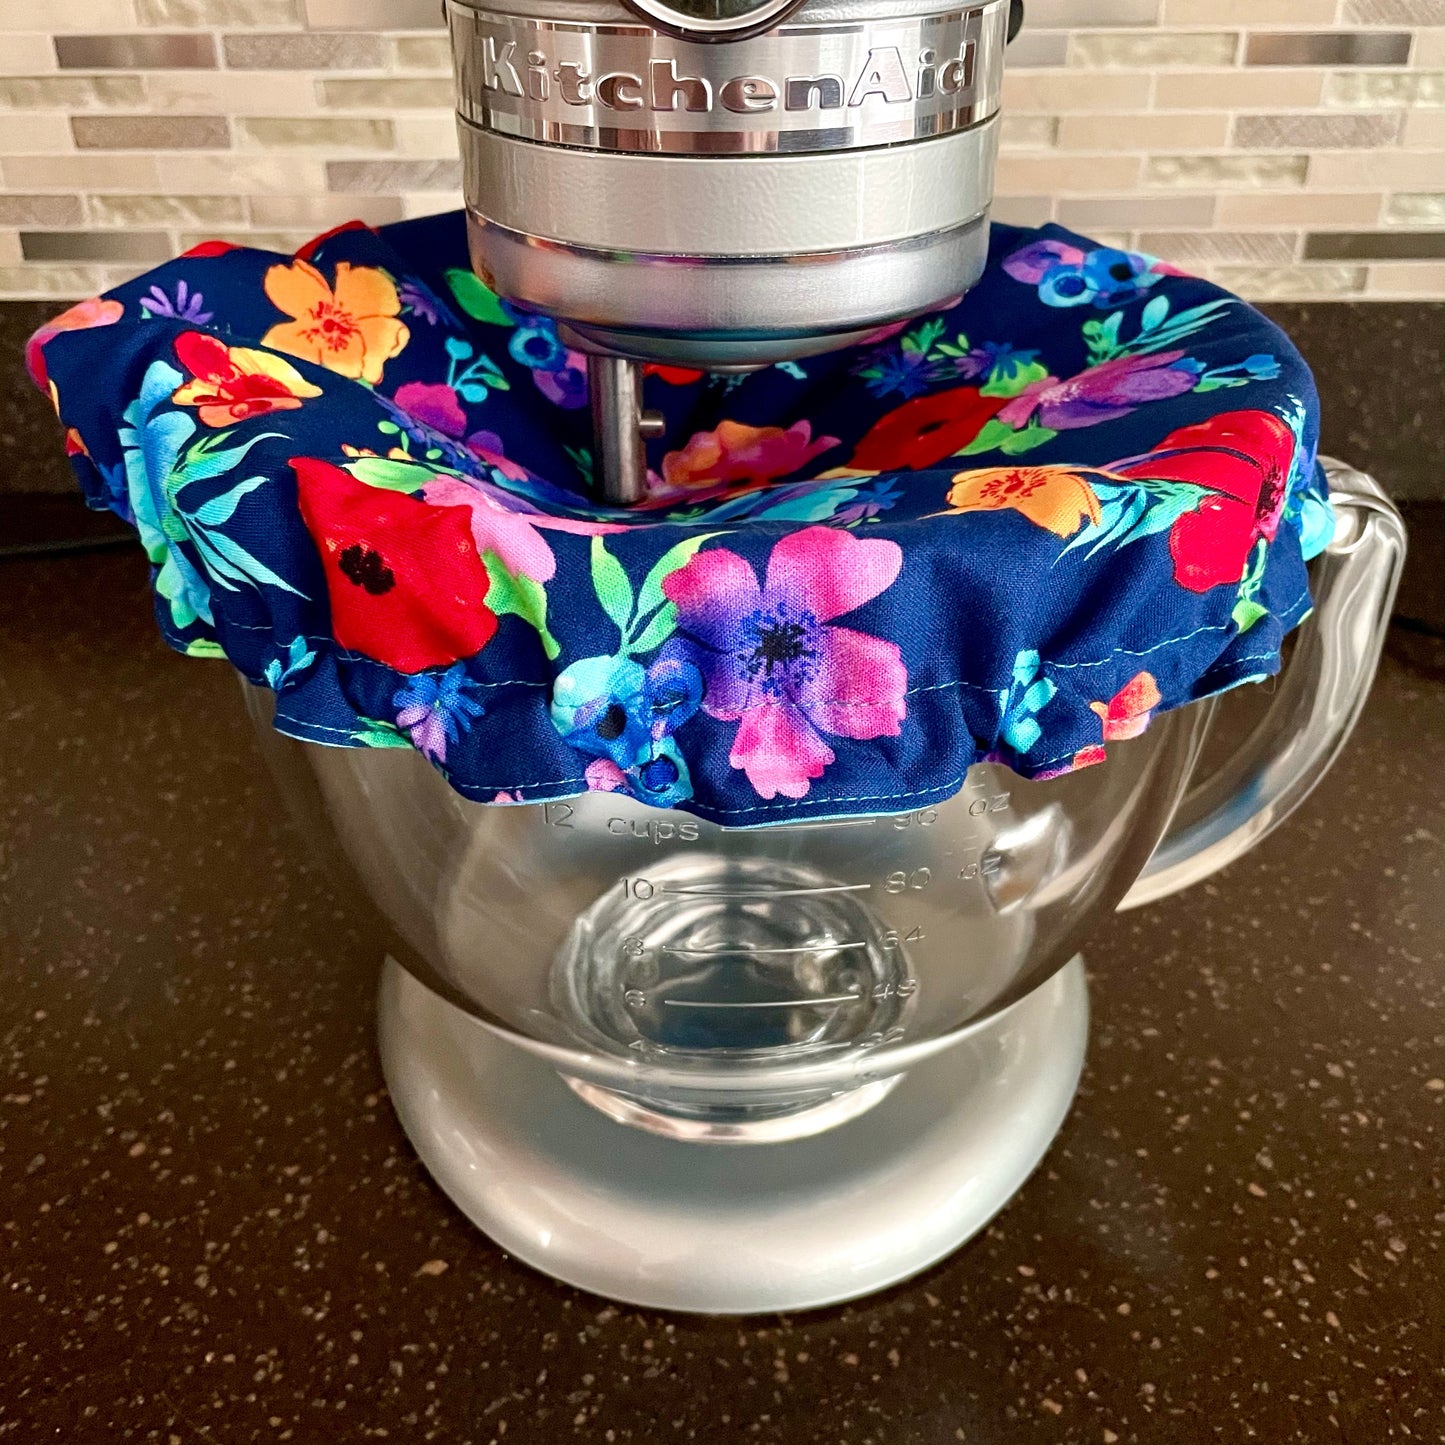 Stand Mixer Bowl Covers - Pioneer Woman Style Blue Floral